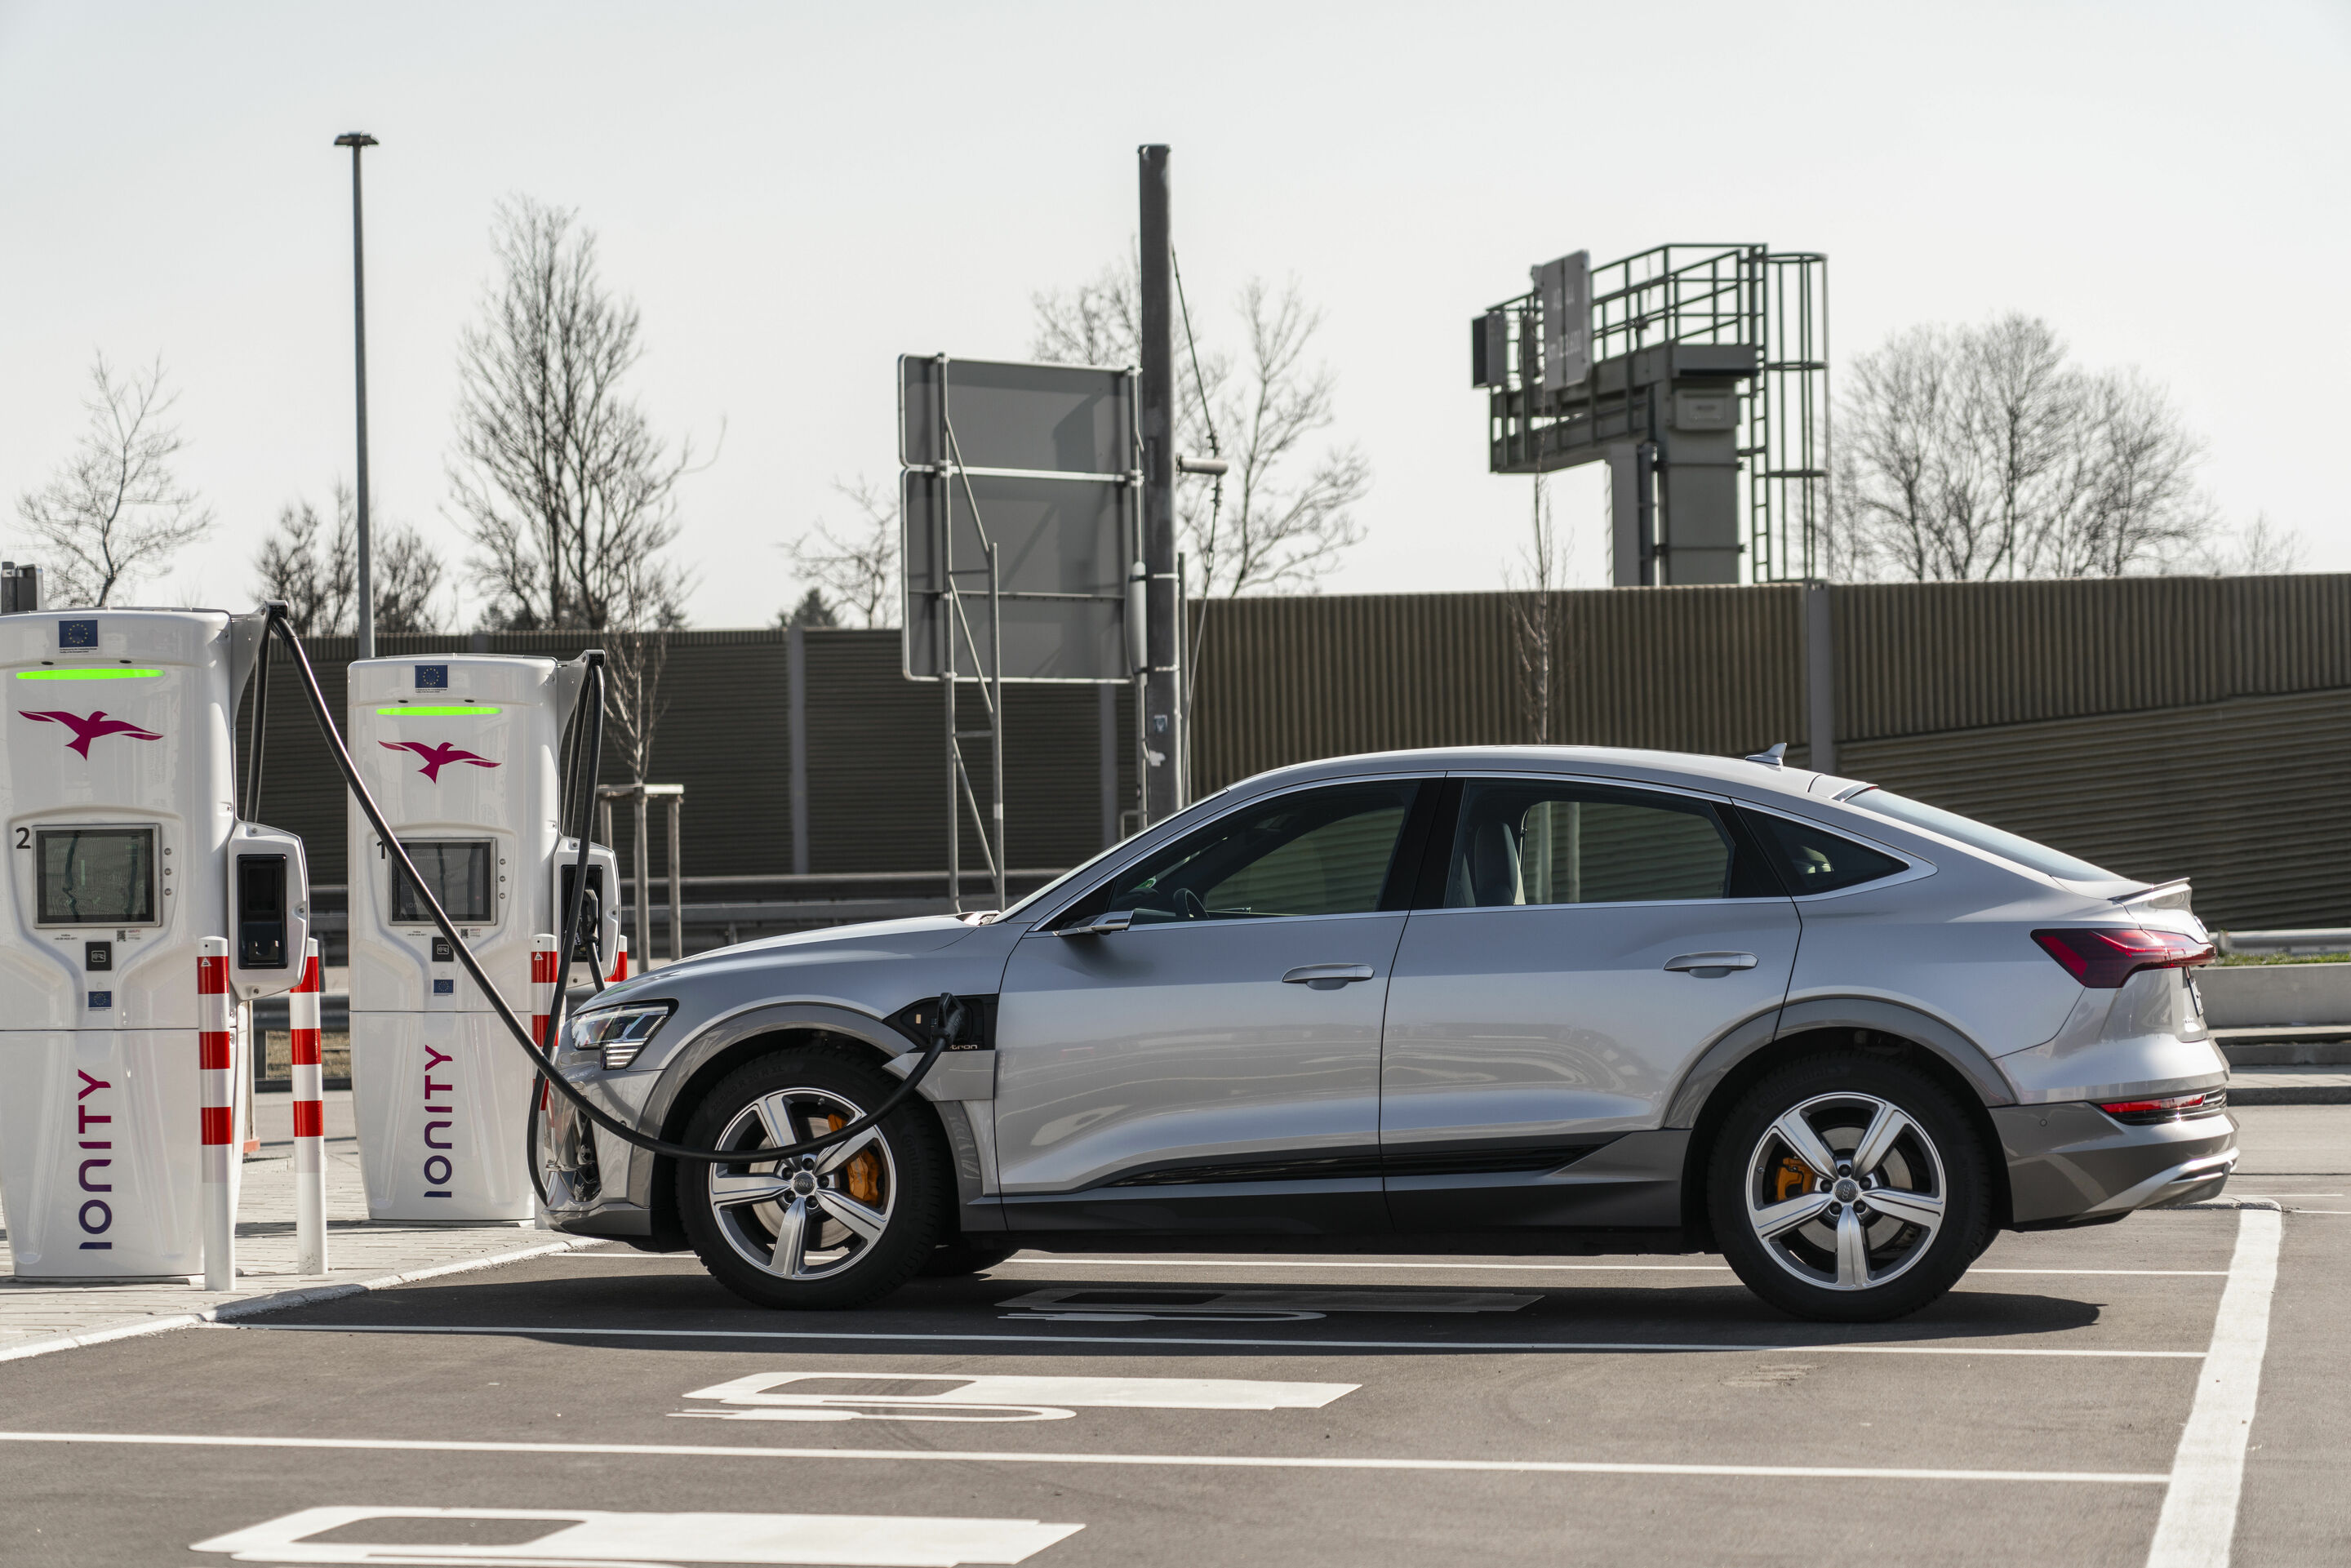 Charging capacity vs. charging speed: What constitutes high charging performance